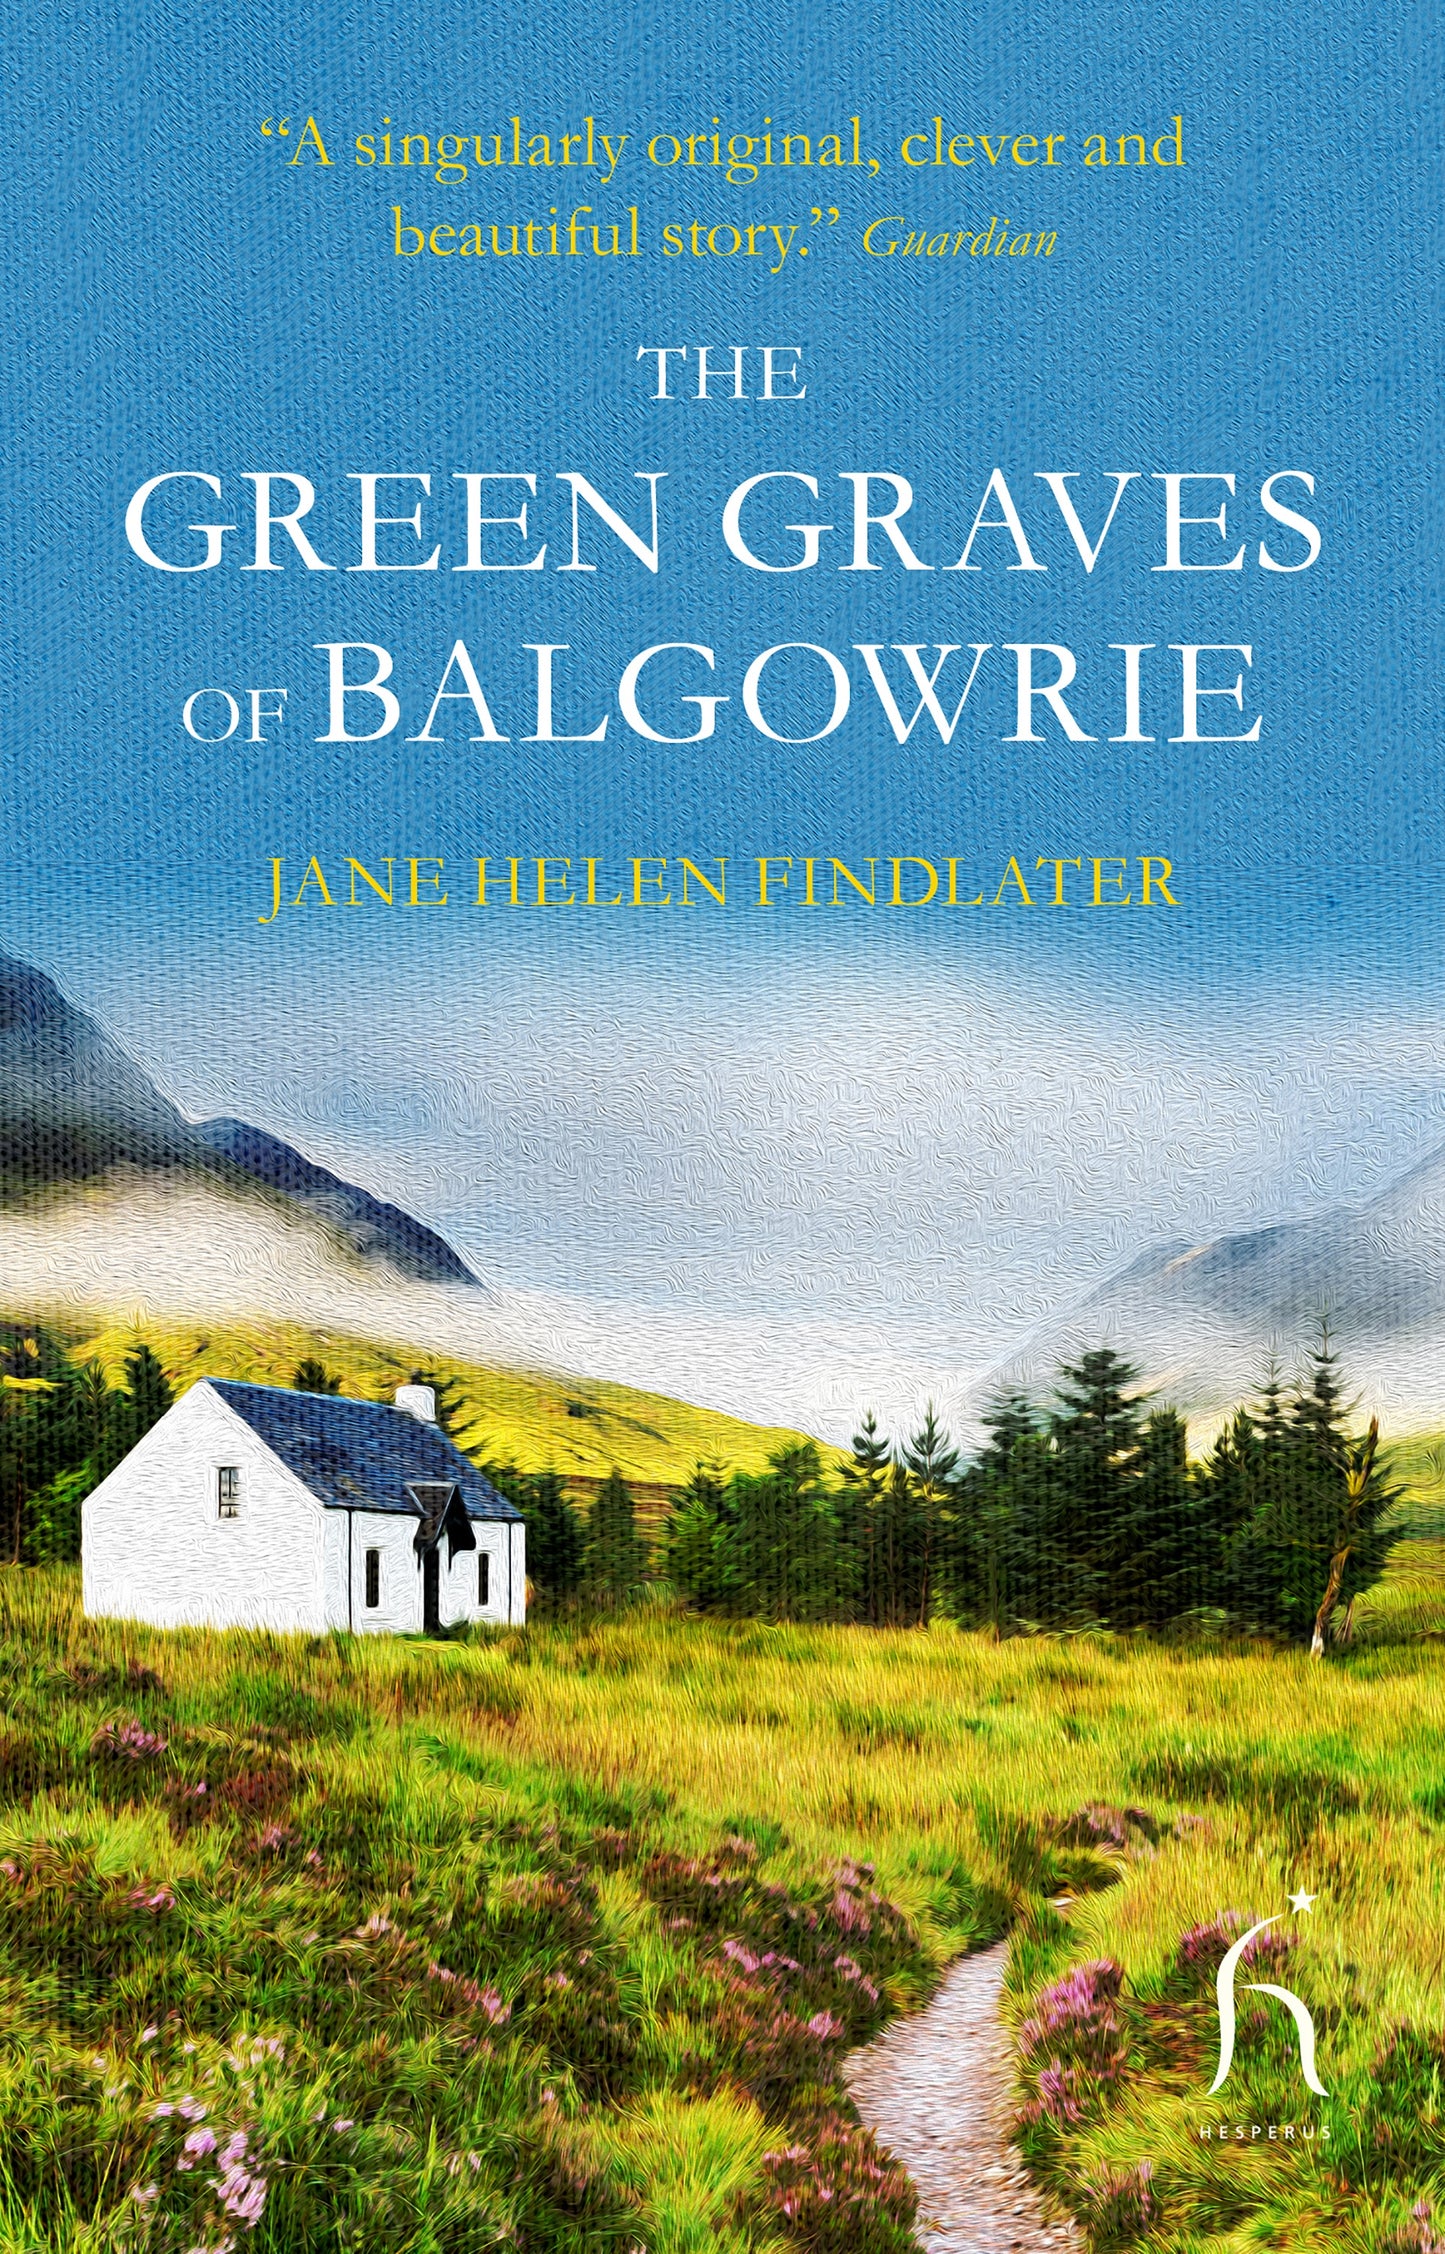 The Green Graves of Balgowrie